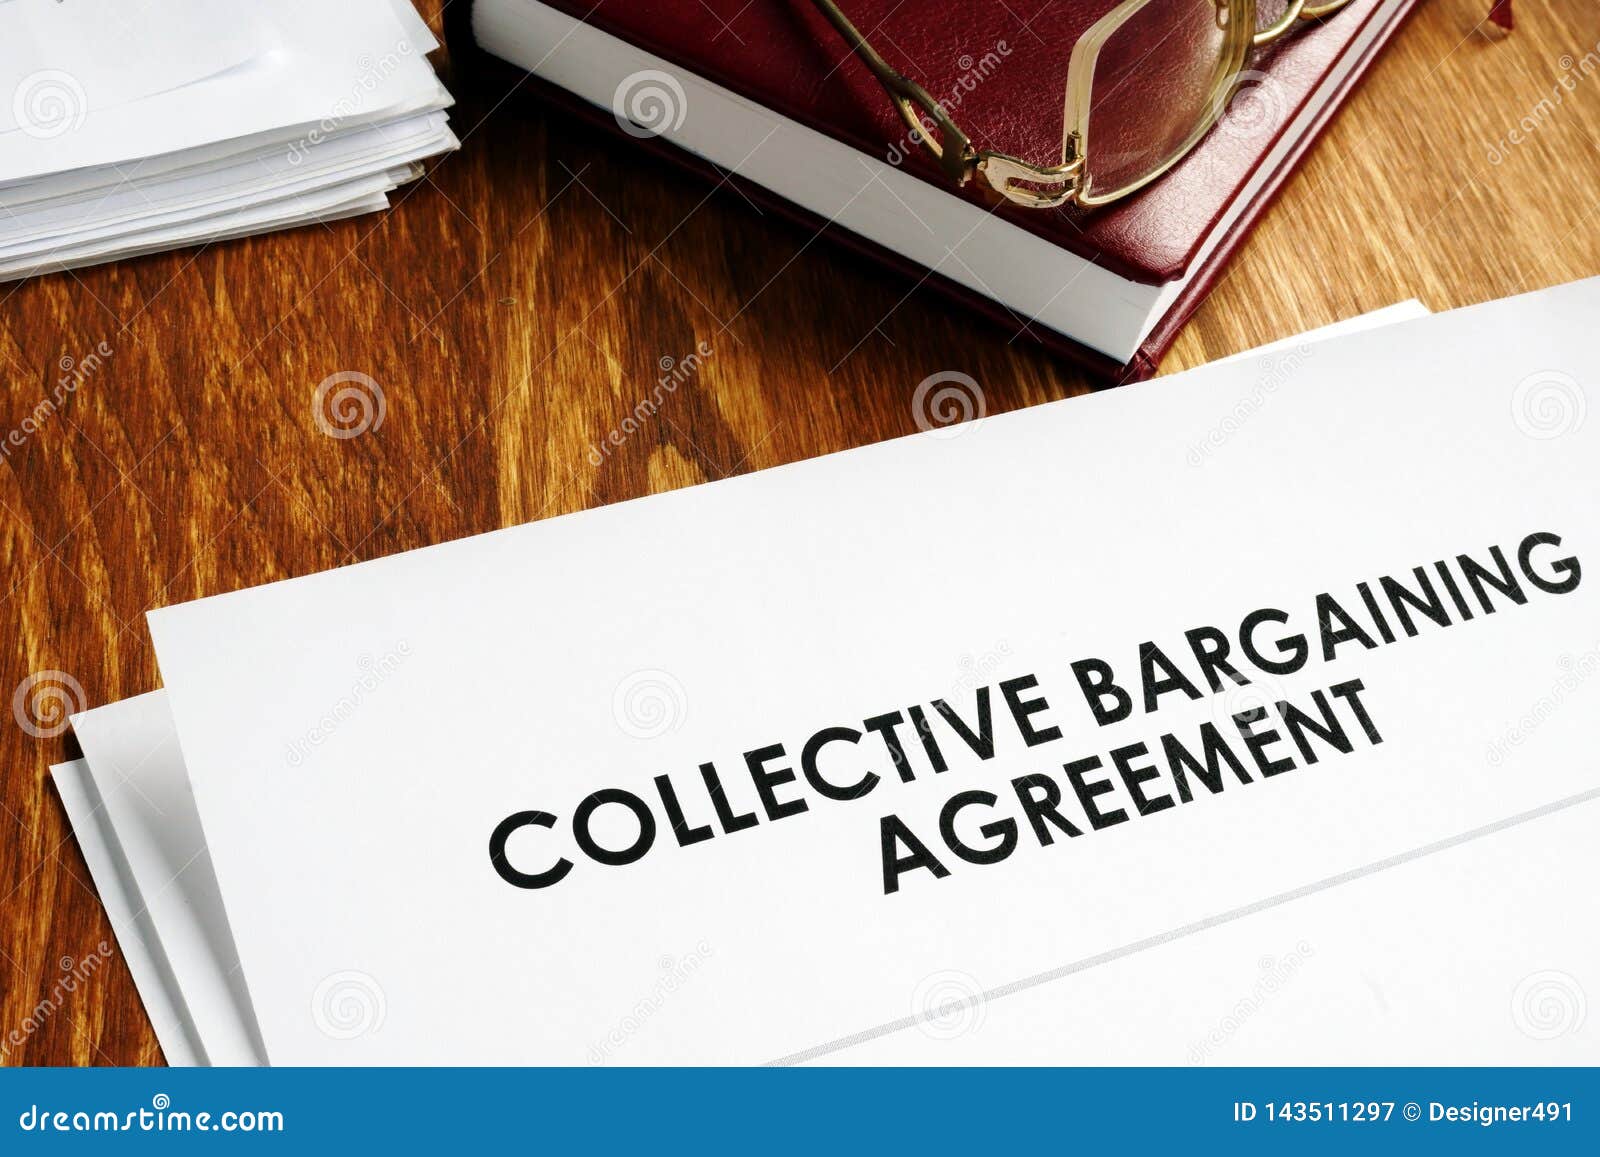 collective bargaining agreement and note pad